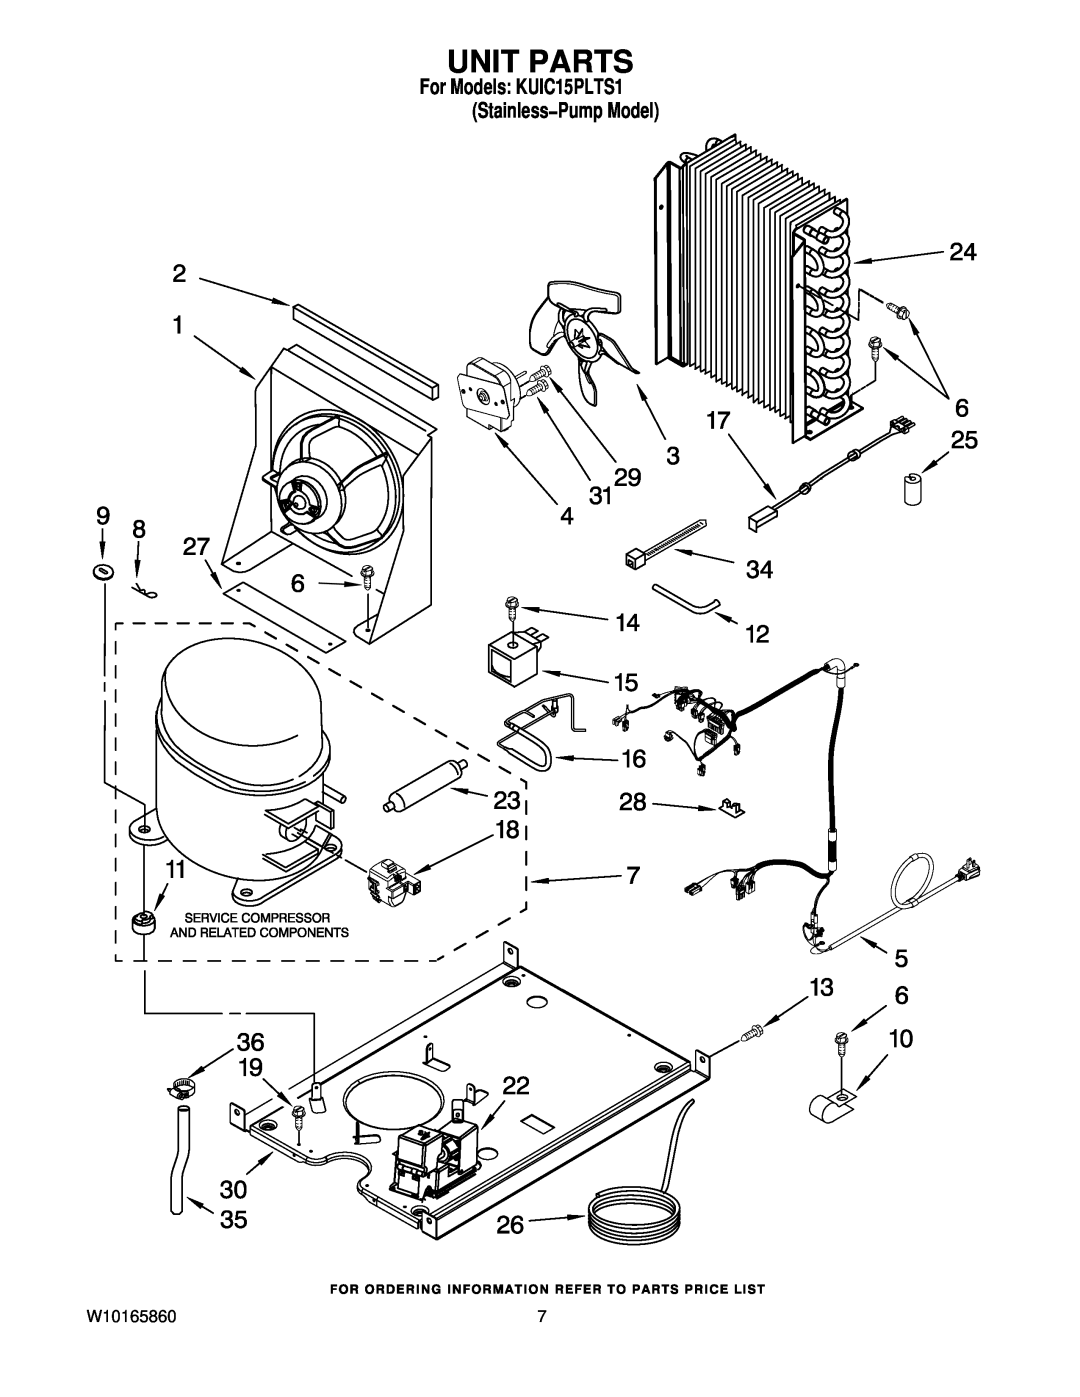 KitchenAid manual Unit Parts, W10165860, For Models KUIC15PLTS1 Stainless−Pump Model 